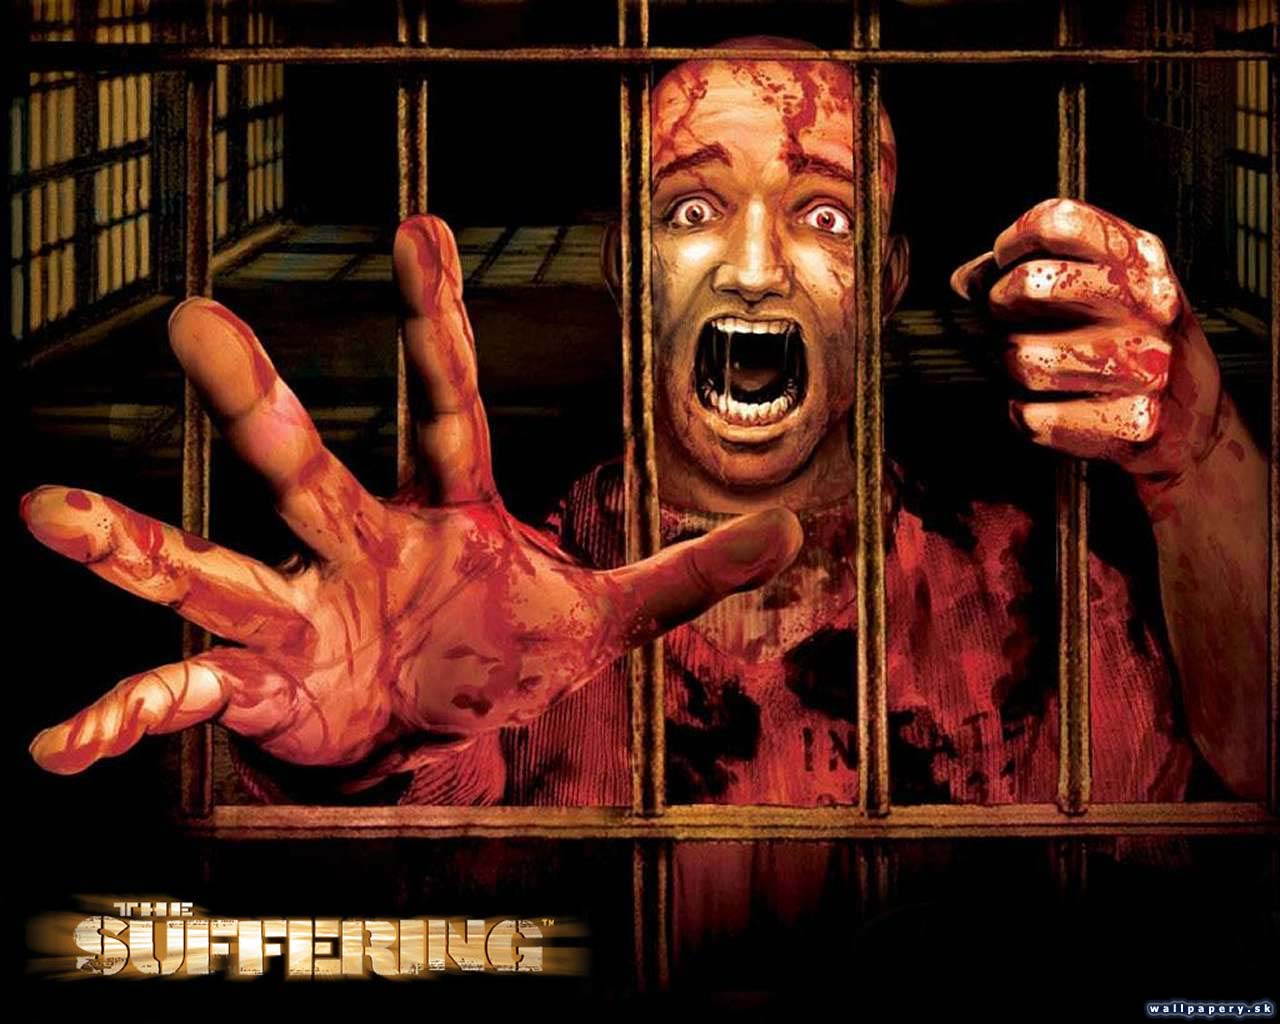 The Suffering - wallpaper 1